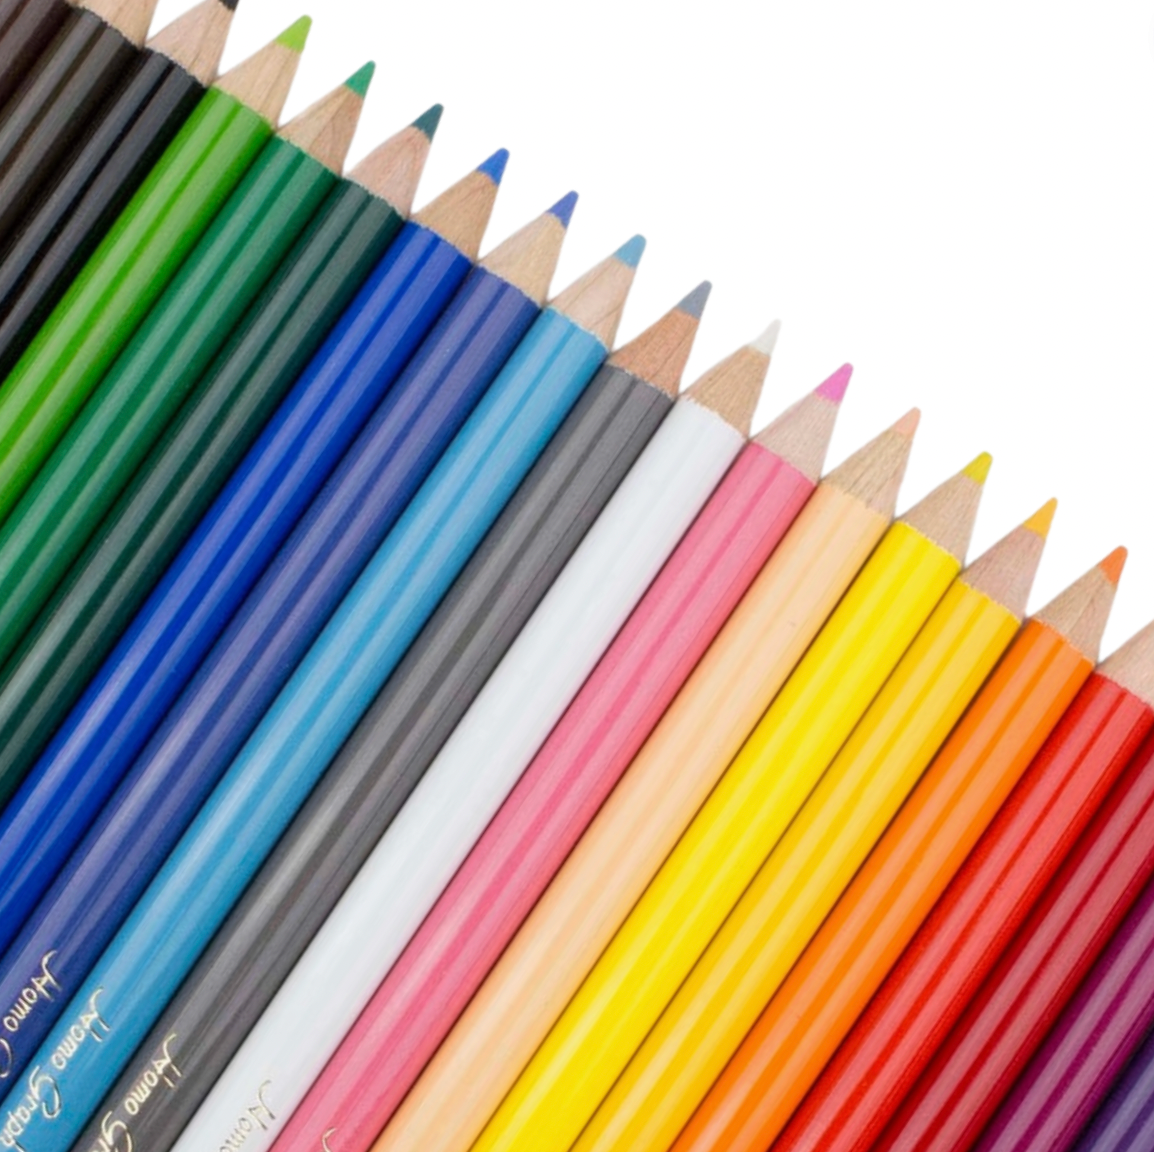 Tombow 1500 Series Colored Pencils (24)